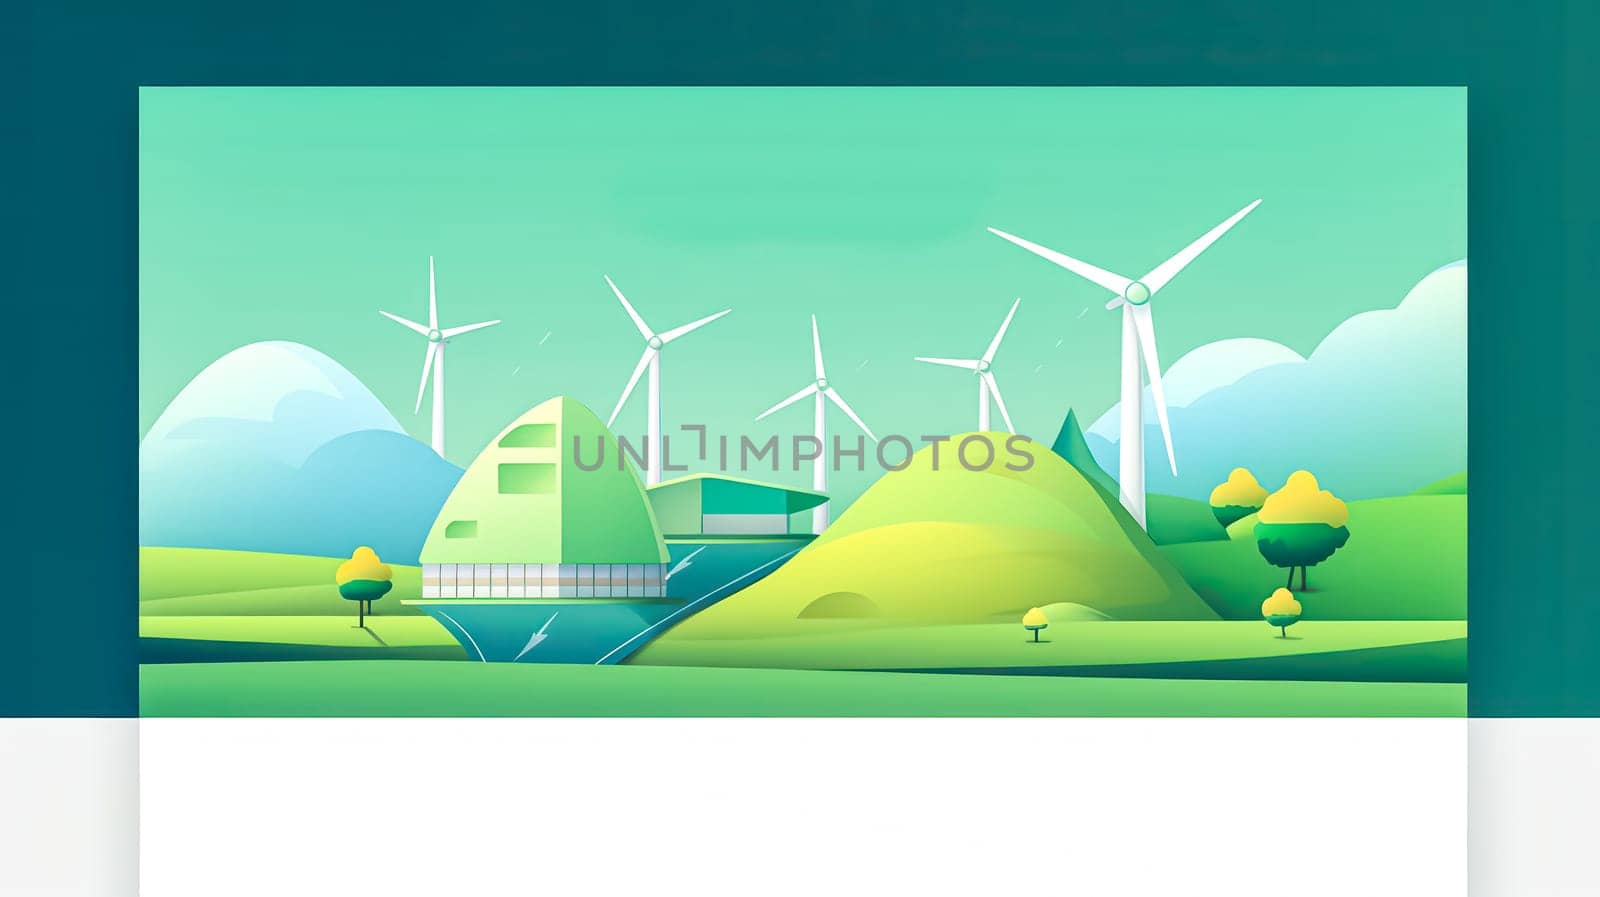 A green landscape with a wind farm and a building. The wind farm is a symbol of renewable energy and the building is a representation of modern architecture. Scene is one of sustainability